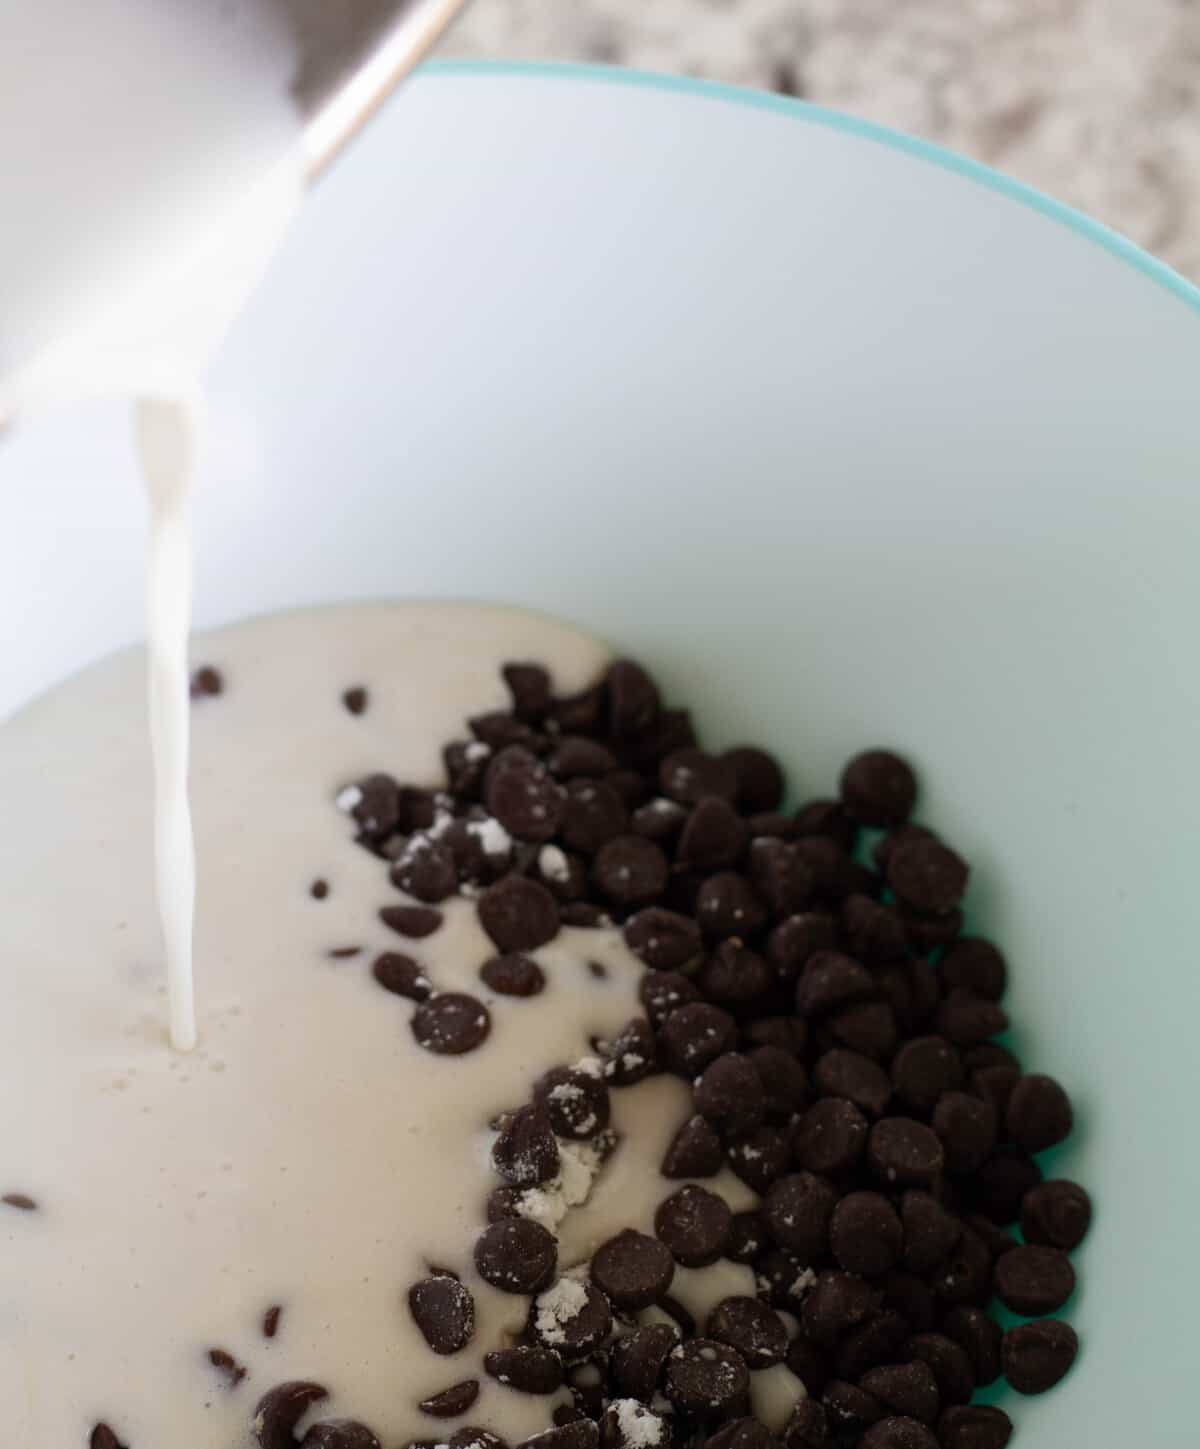 Pouring cream over chocolate chips.